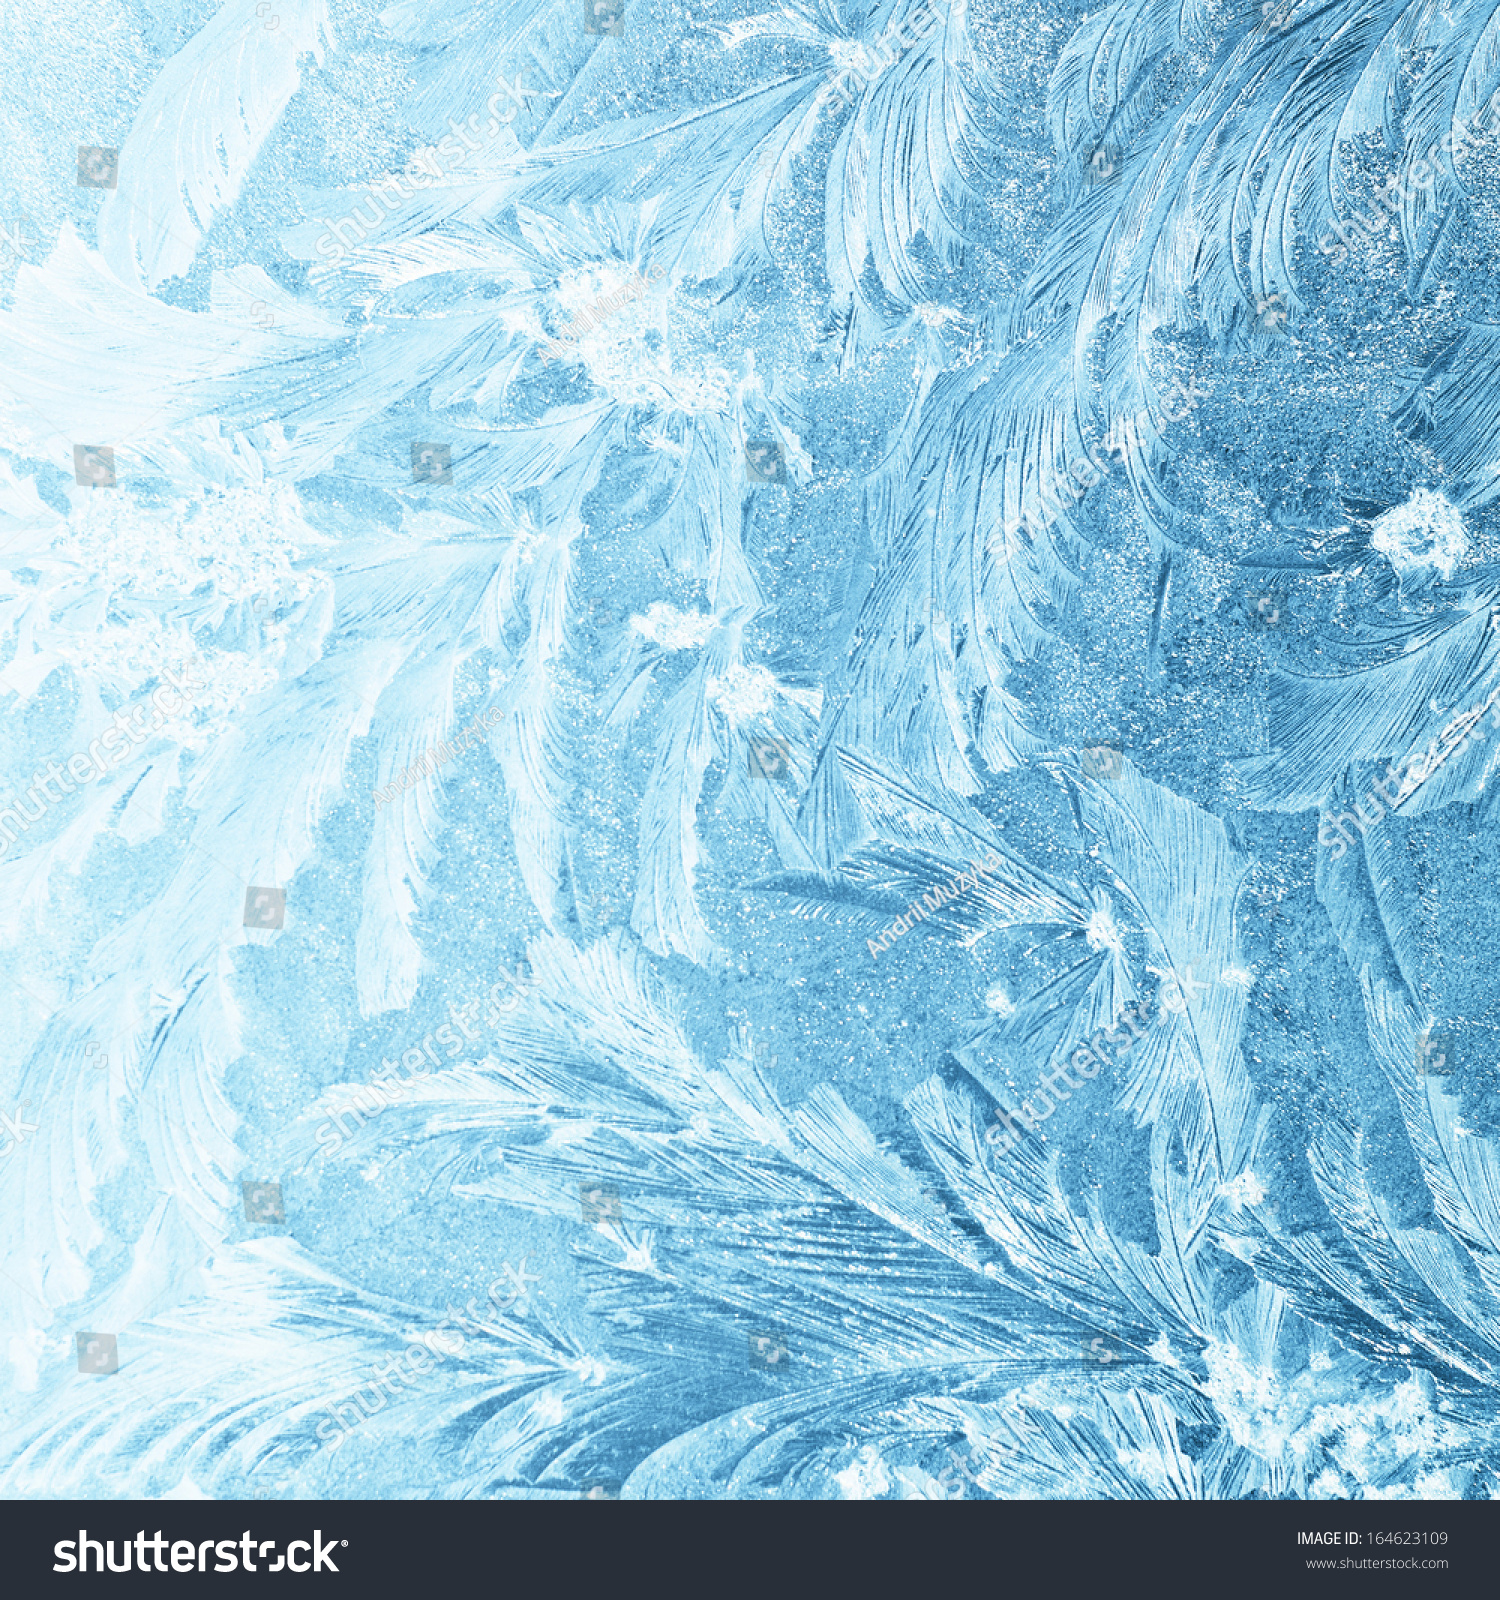 ice natural background #164623109